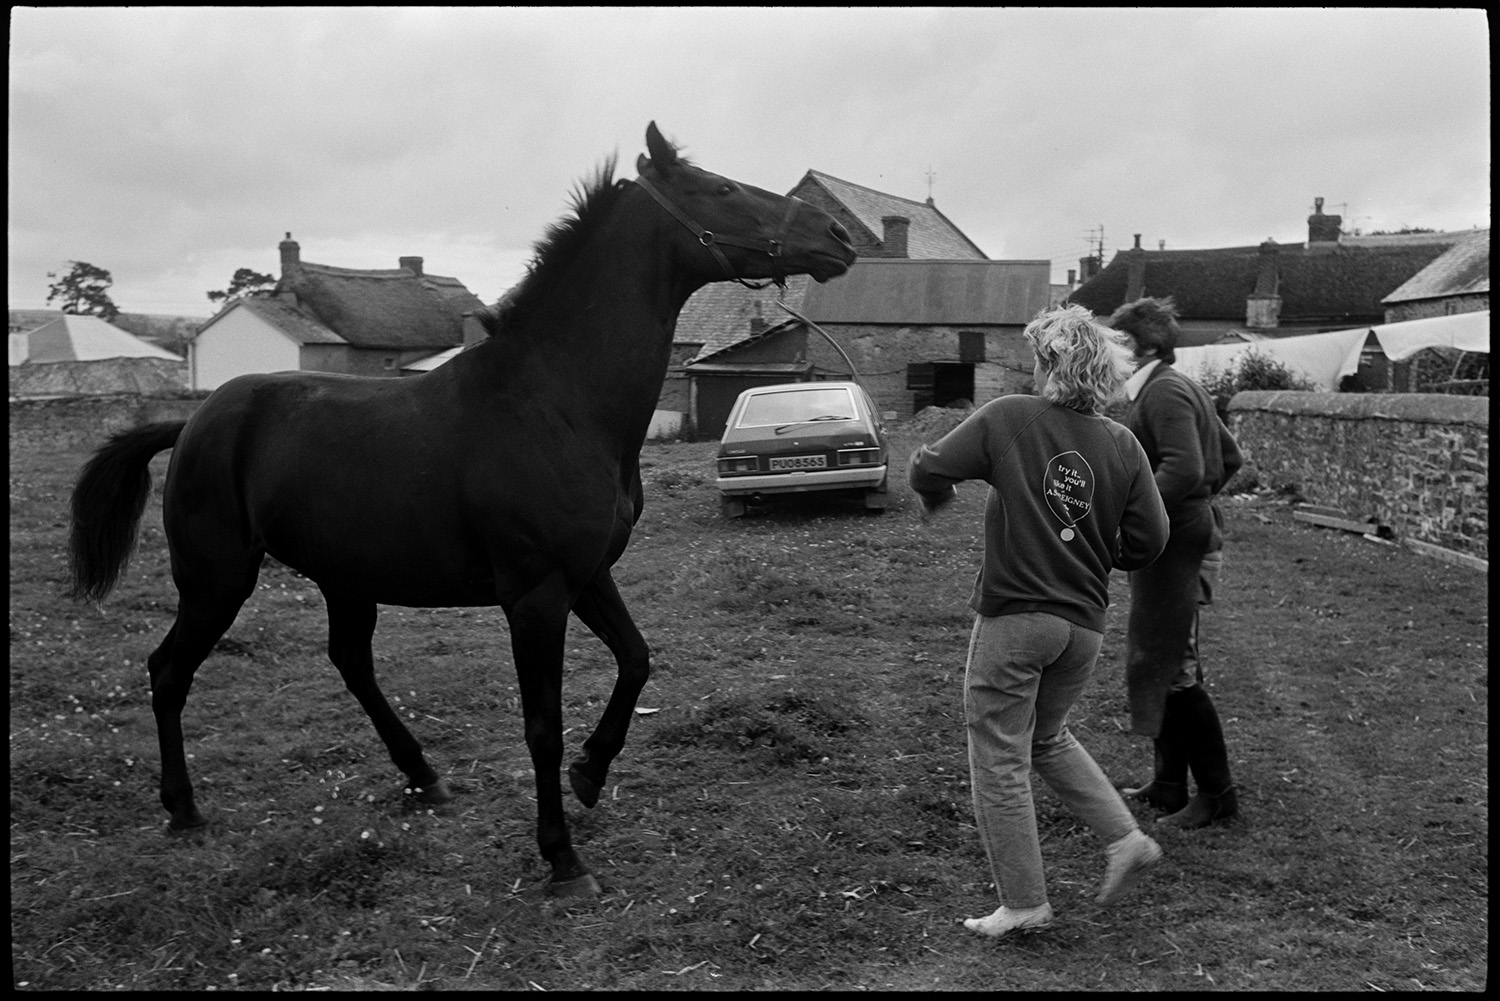 Blacksmith shoeing horse in field. 
[Kay Allin and a blacksmith attempting to control a horse to shoe it, in a field at Dolton. Thatched cottages are visible in the background.]